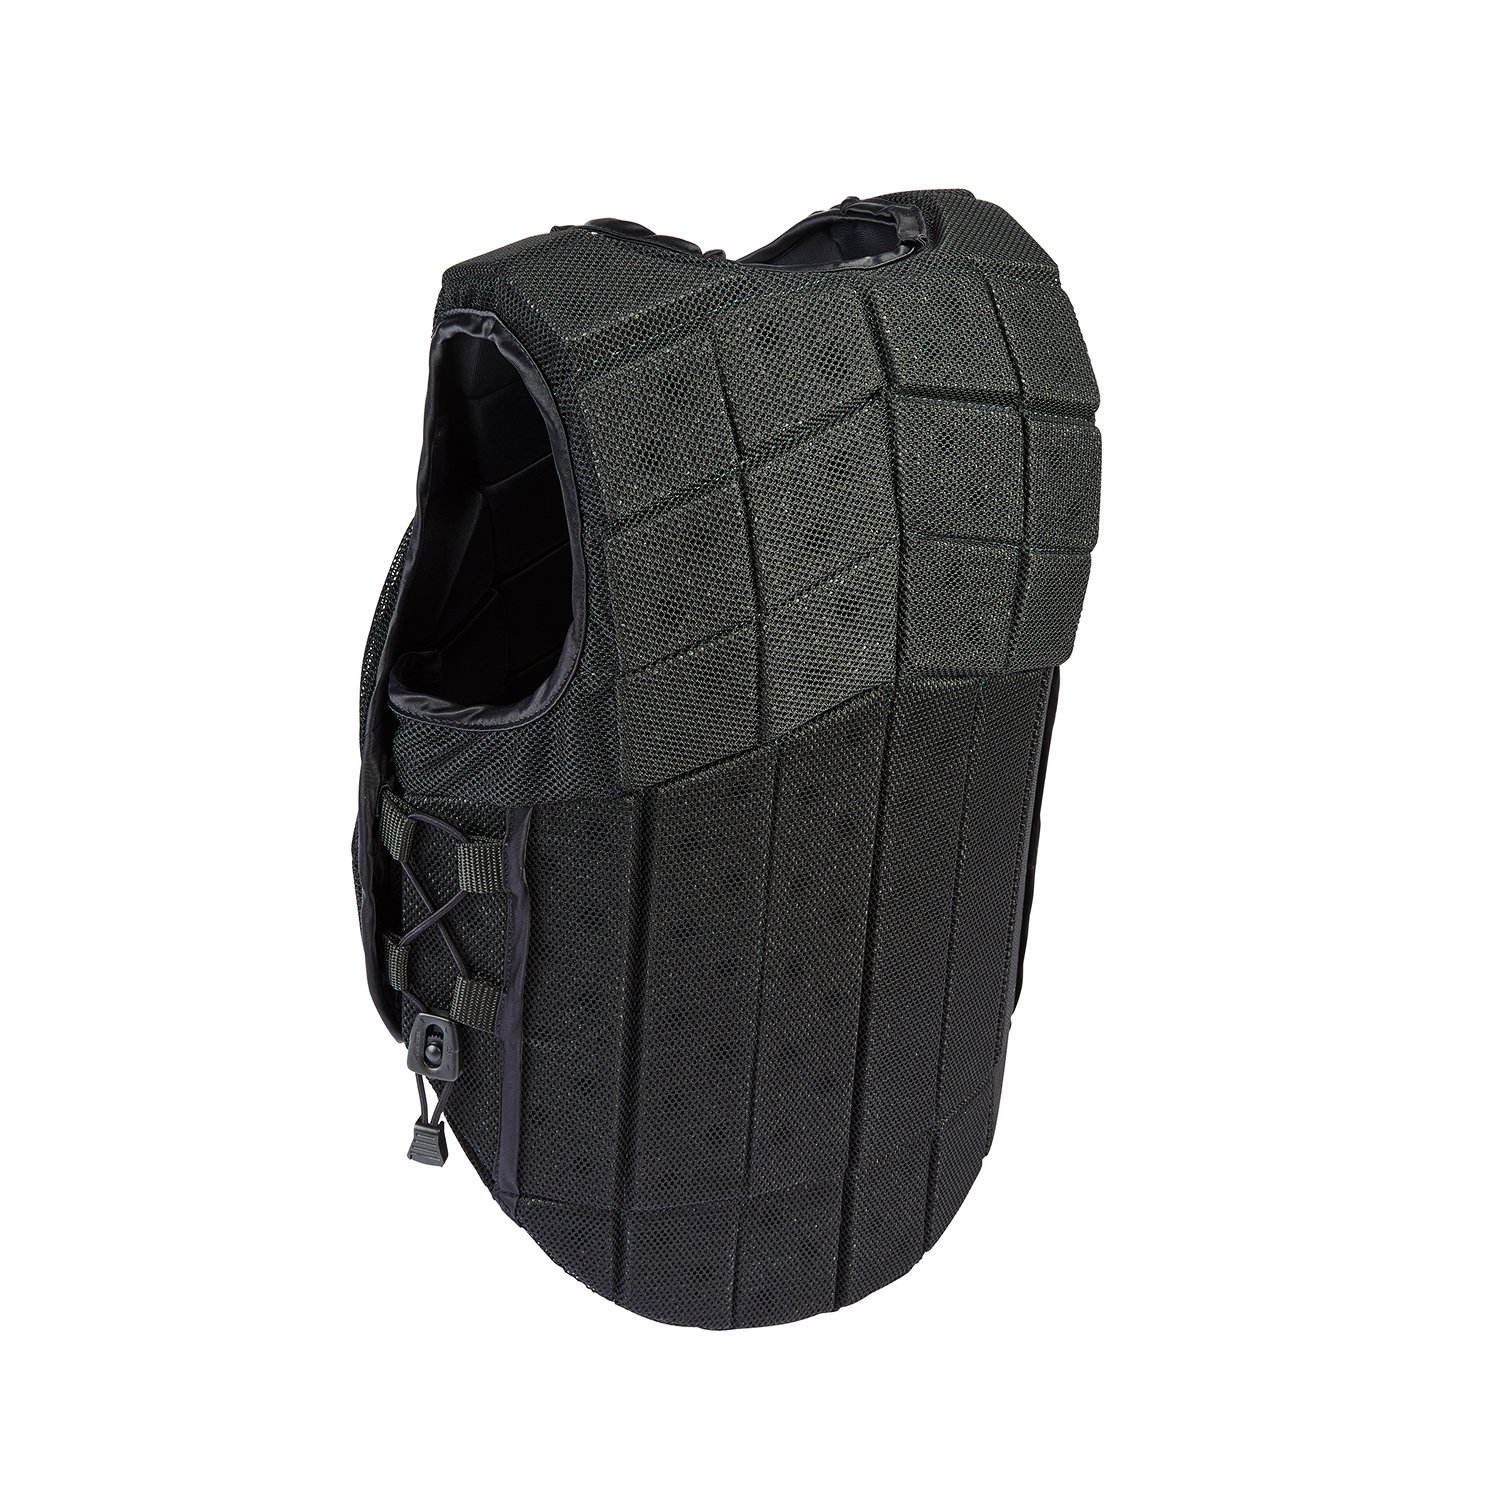 RACESAFE PROVENT 3.0 JUNIOR BODY PROTECTORALL SIZES AVAILABLE 